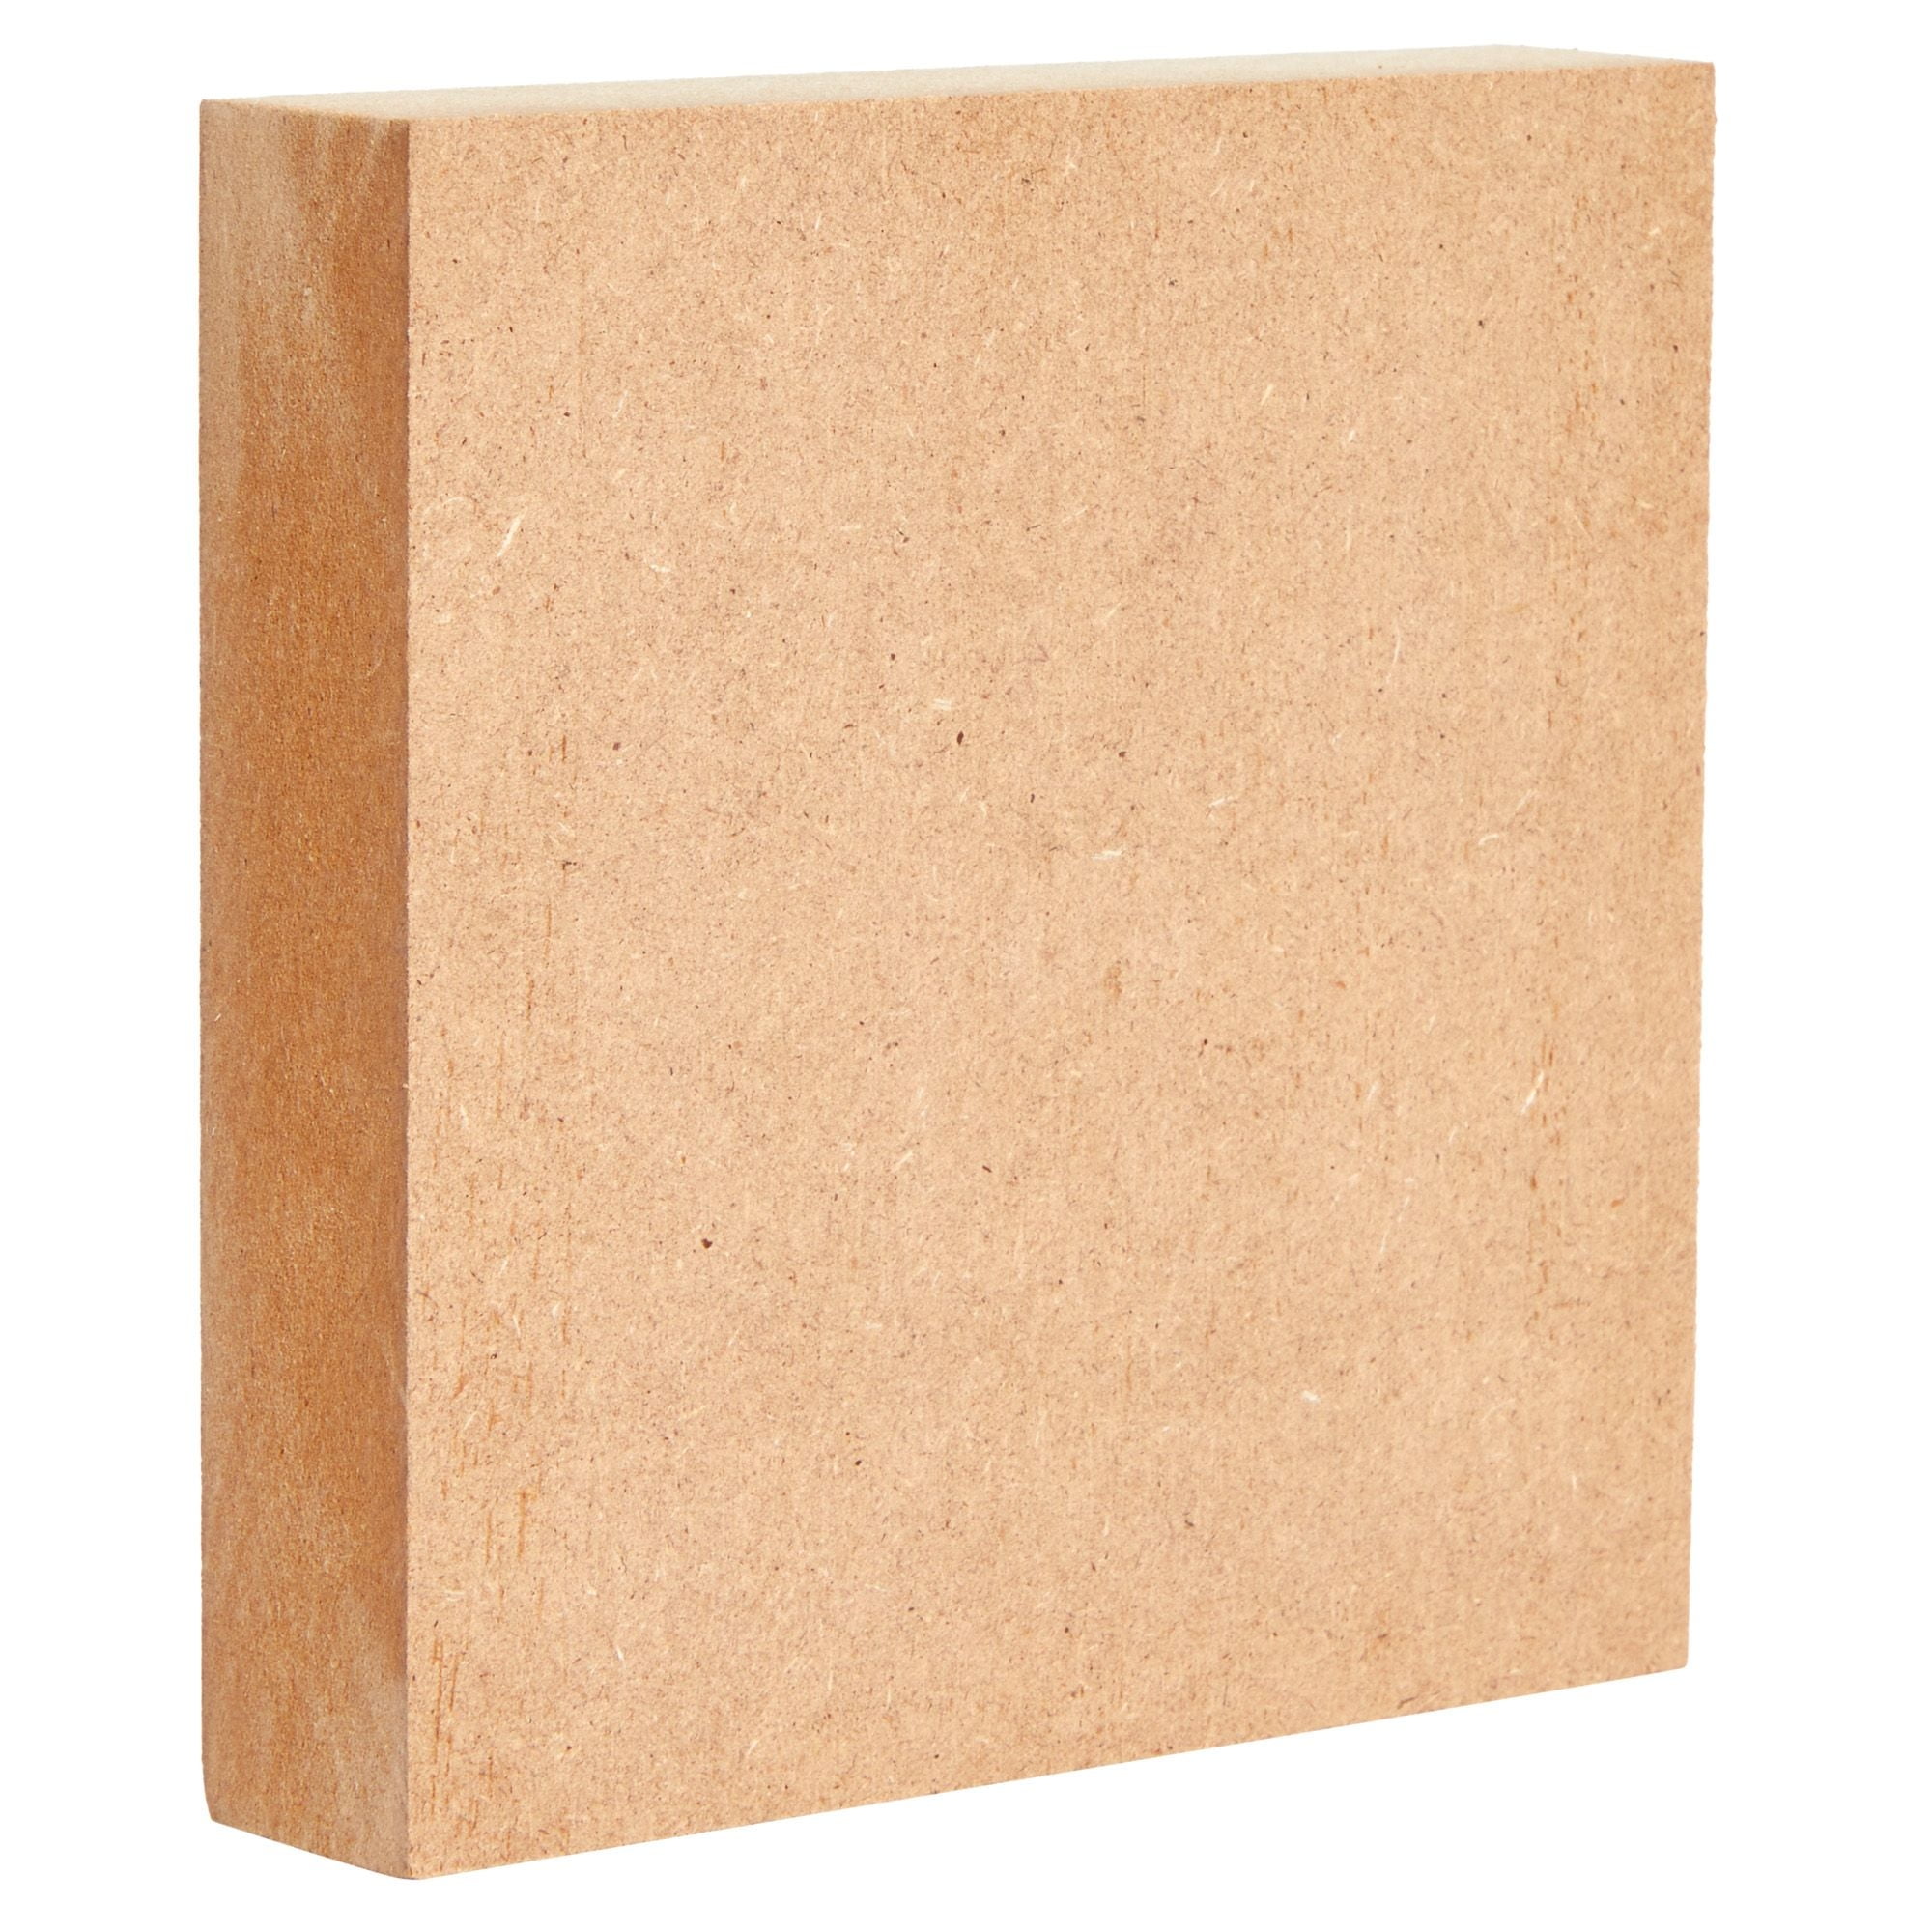 FSWCCK Unfinished Blank Square Wood Pieces, 5 Pack 6mm 1/4 x 12